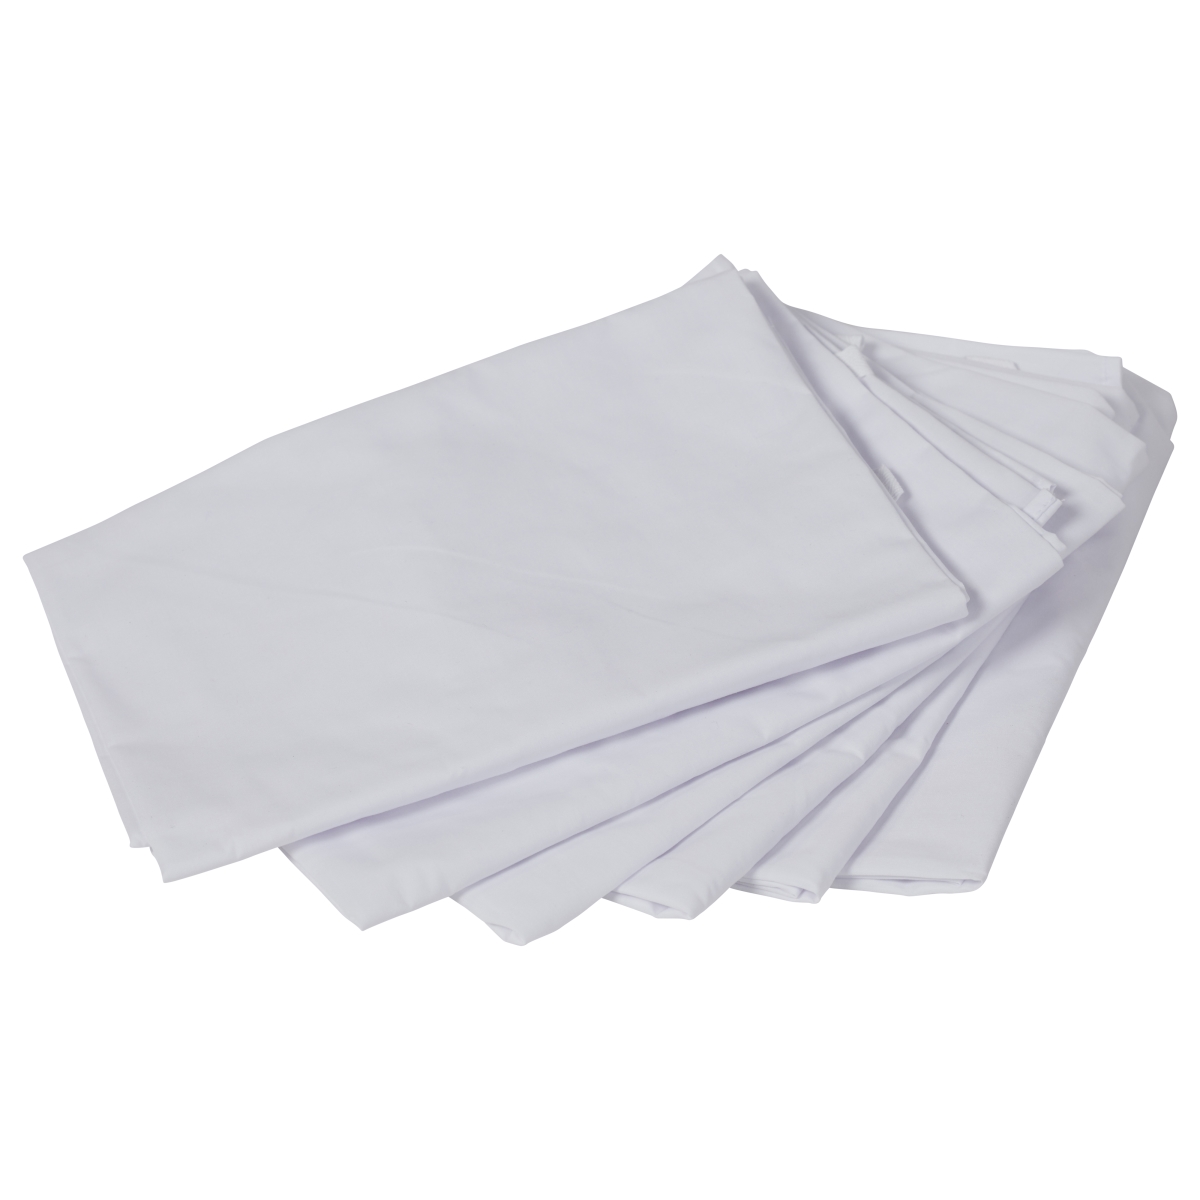 10501-wh Hanging Rest Mat Sheet - White - Pack Of 6